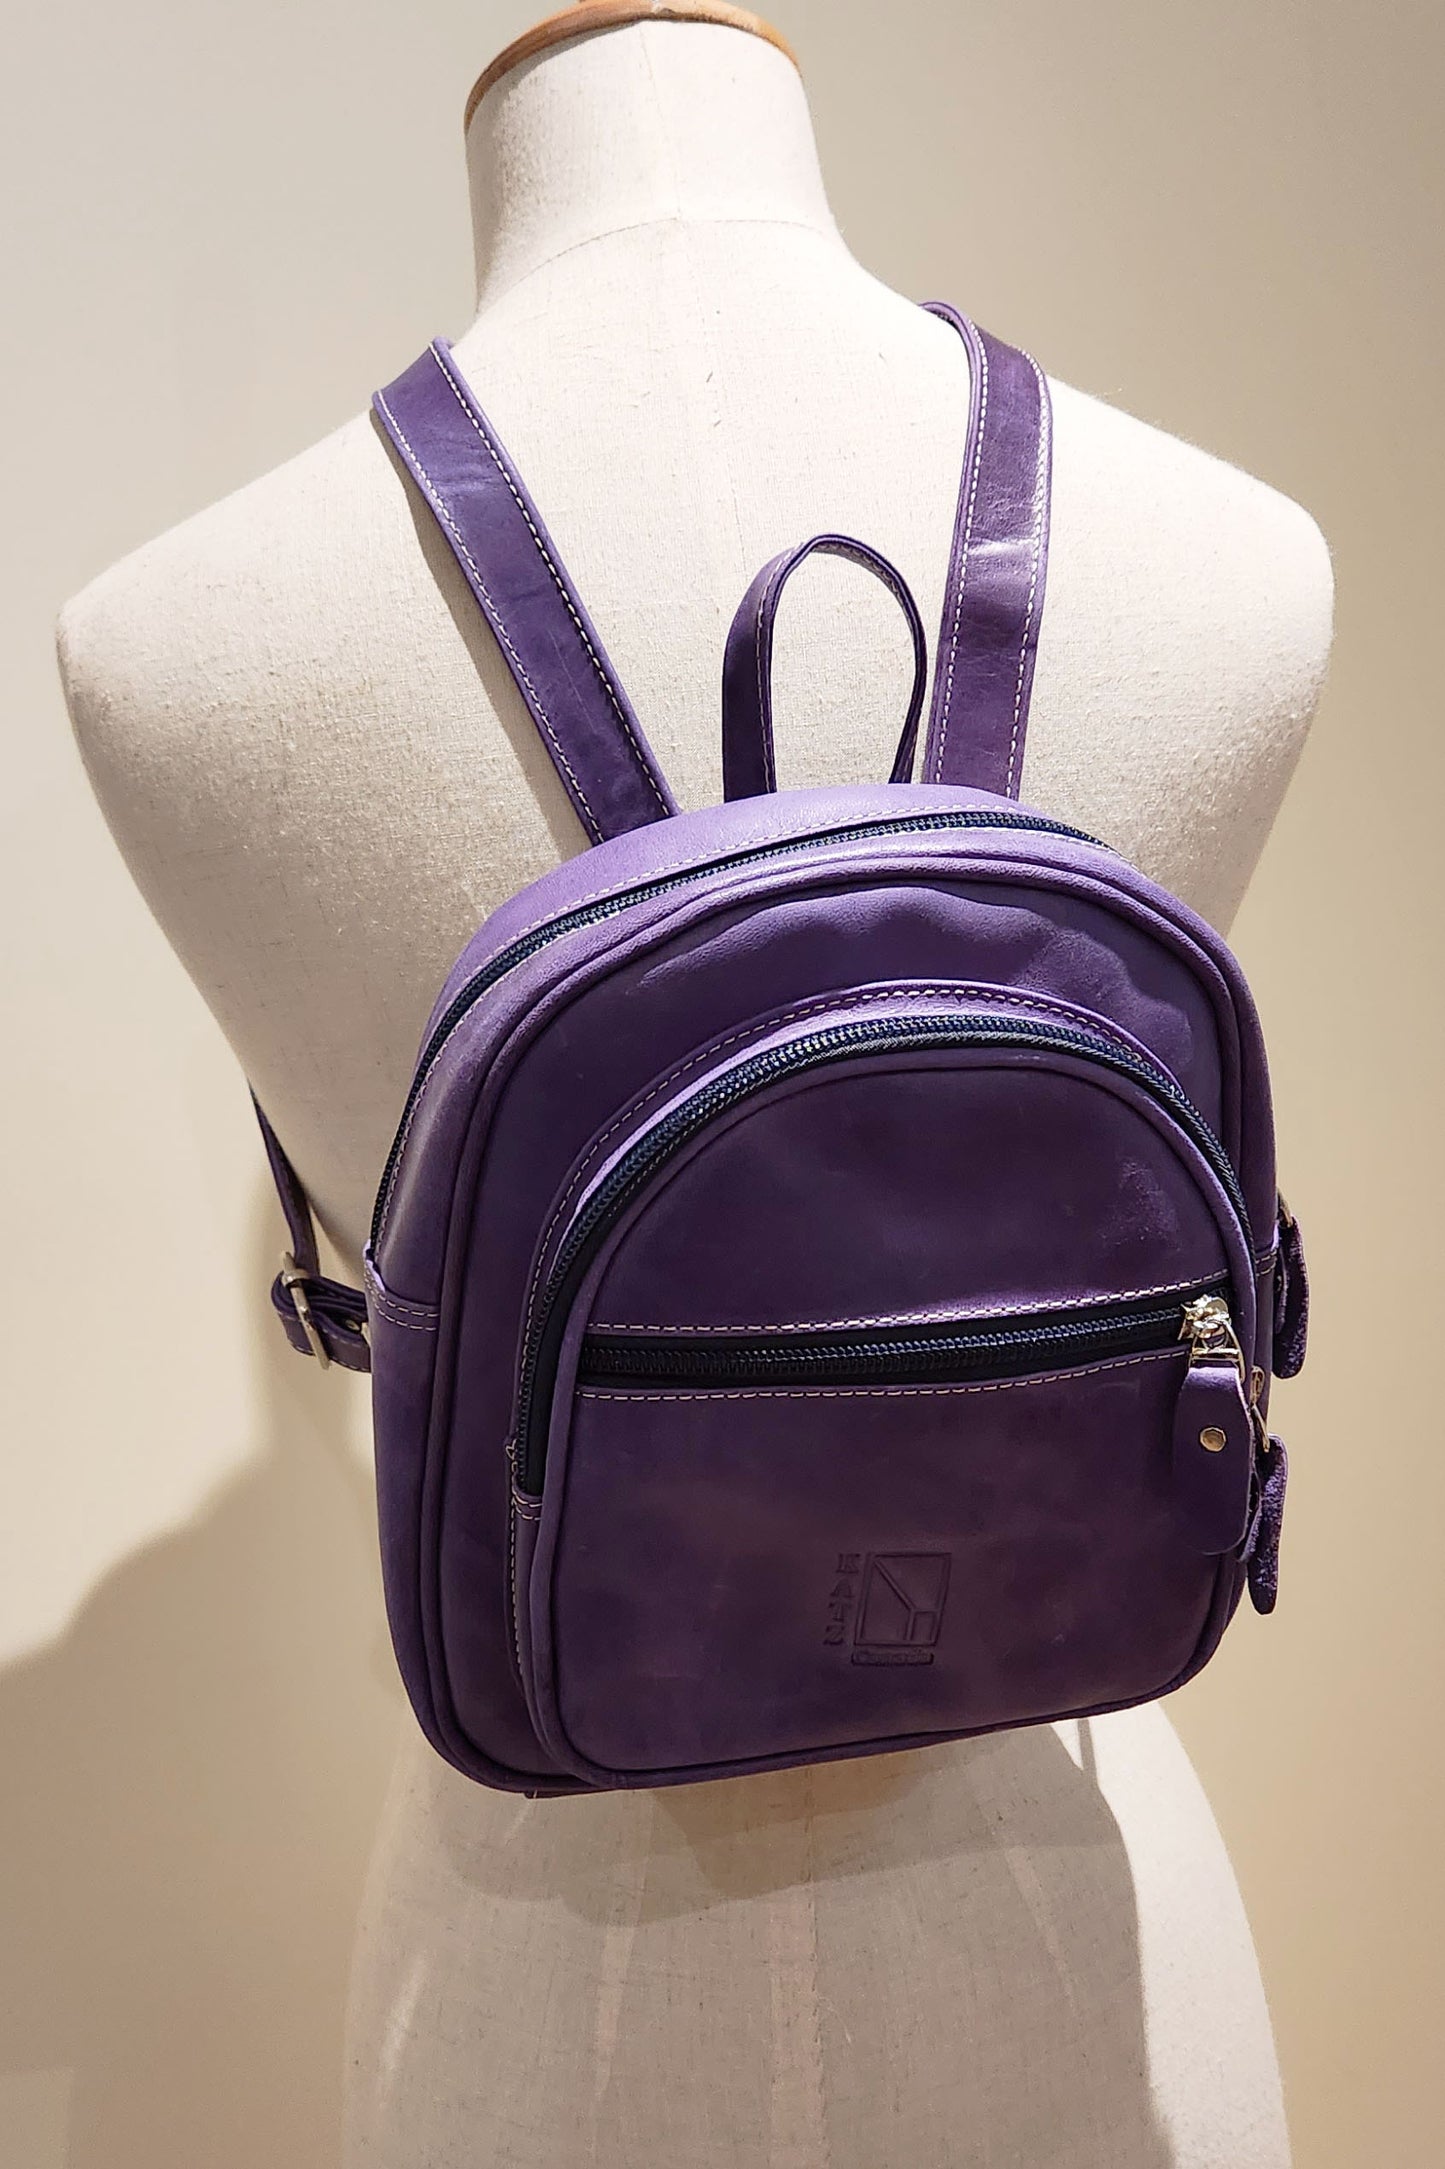 Small Purple Leather Backpack